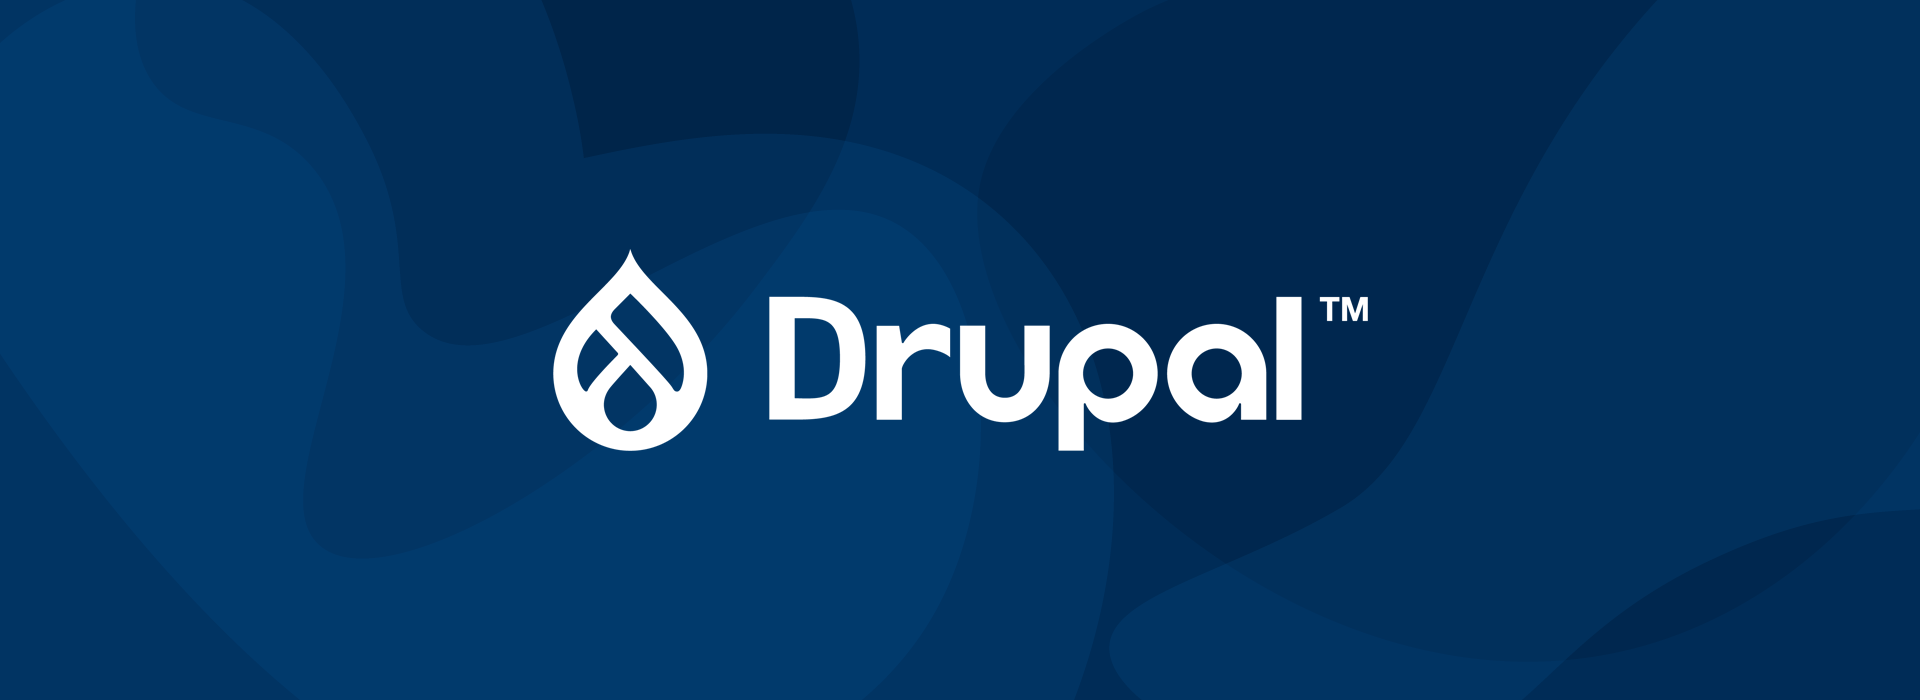 Drupal 10 is coming out soon